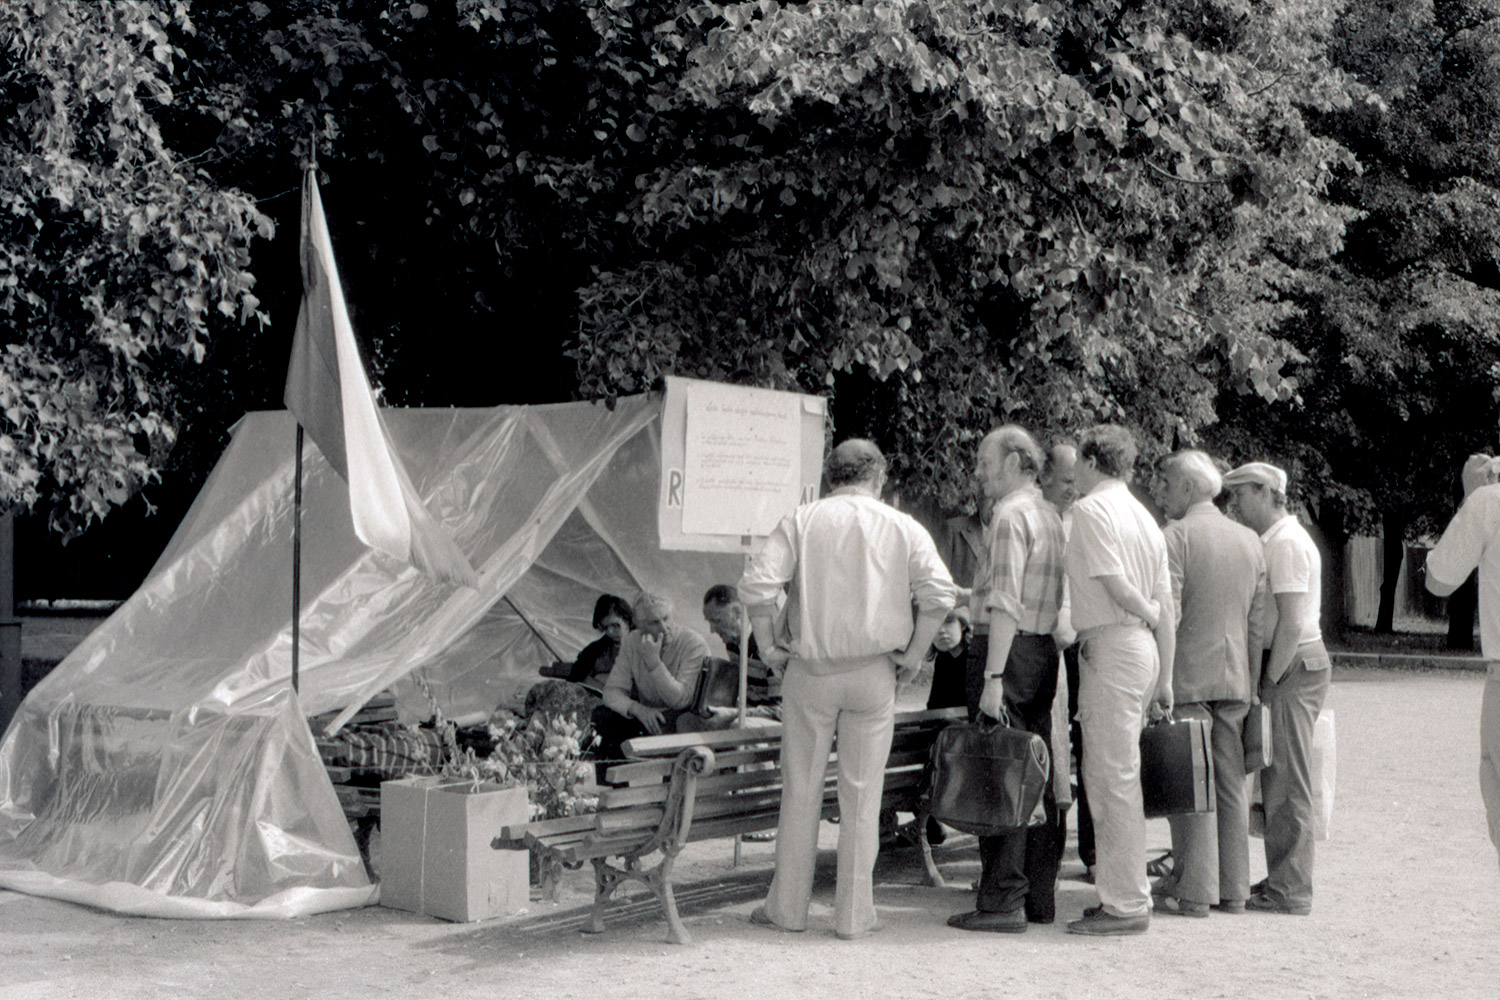 1989 – V. Milvydas’ hunger strike near the Palace of the LCP Central Committee in protest against the Molotov-Ribbentrop Pact and its consequences. People read a poster hanging at the tent of the protesters: “With this hunger strike, we demand that: 1. Without delay, the secret documents of the Molotov-Ribbentrop Pact would be discussed. 2. The secret documents must be declared unlawful and invalid from the date of their signing and their consequences must be liquidated. 3. The Peace Treaty signed by the governments of Lithuania and Soviet Russia on 12 July 1920 must be declared valid.” LVCA, photographer: V. Kapočius.